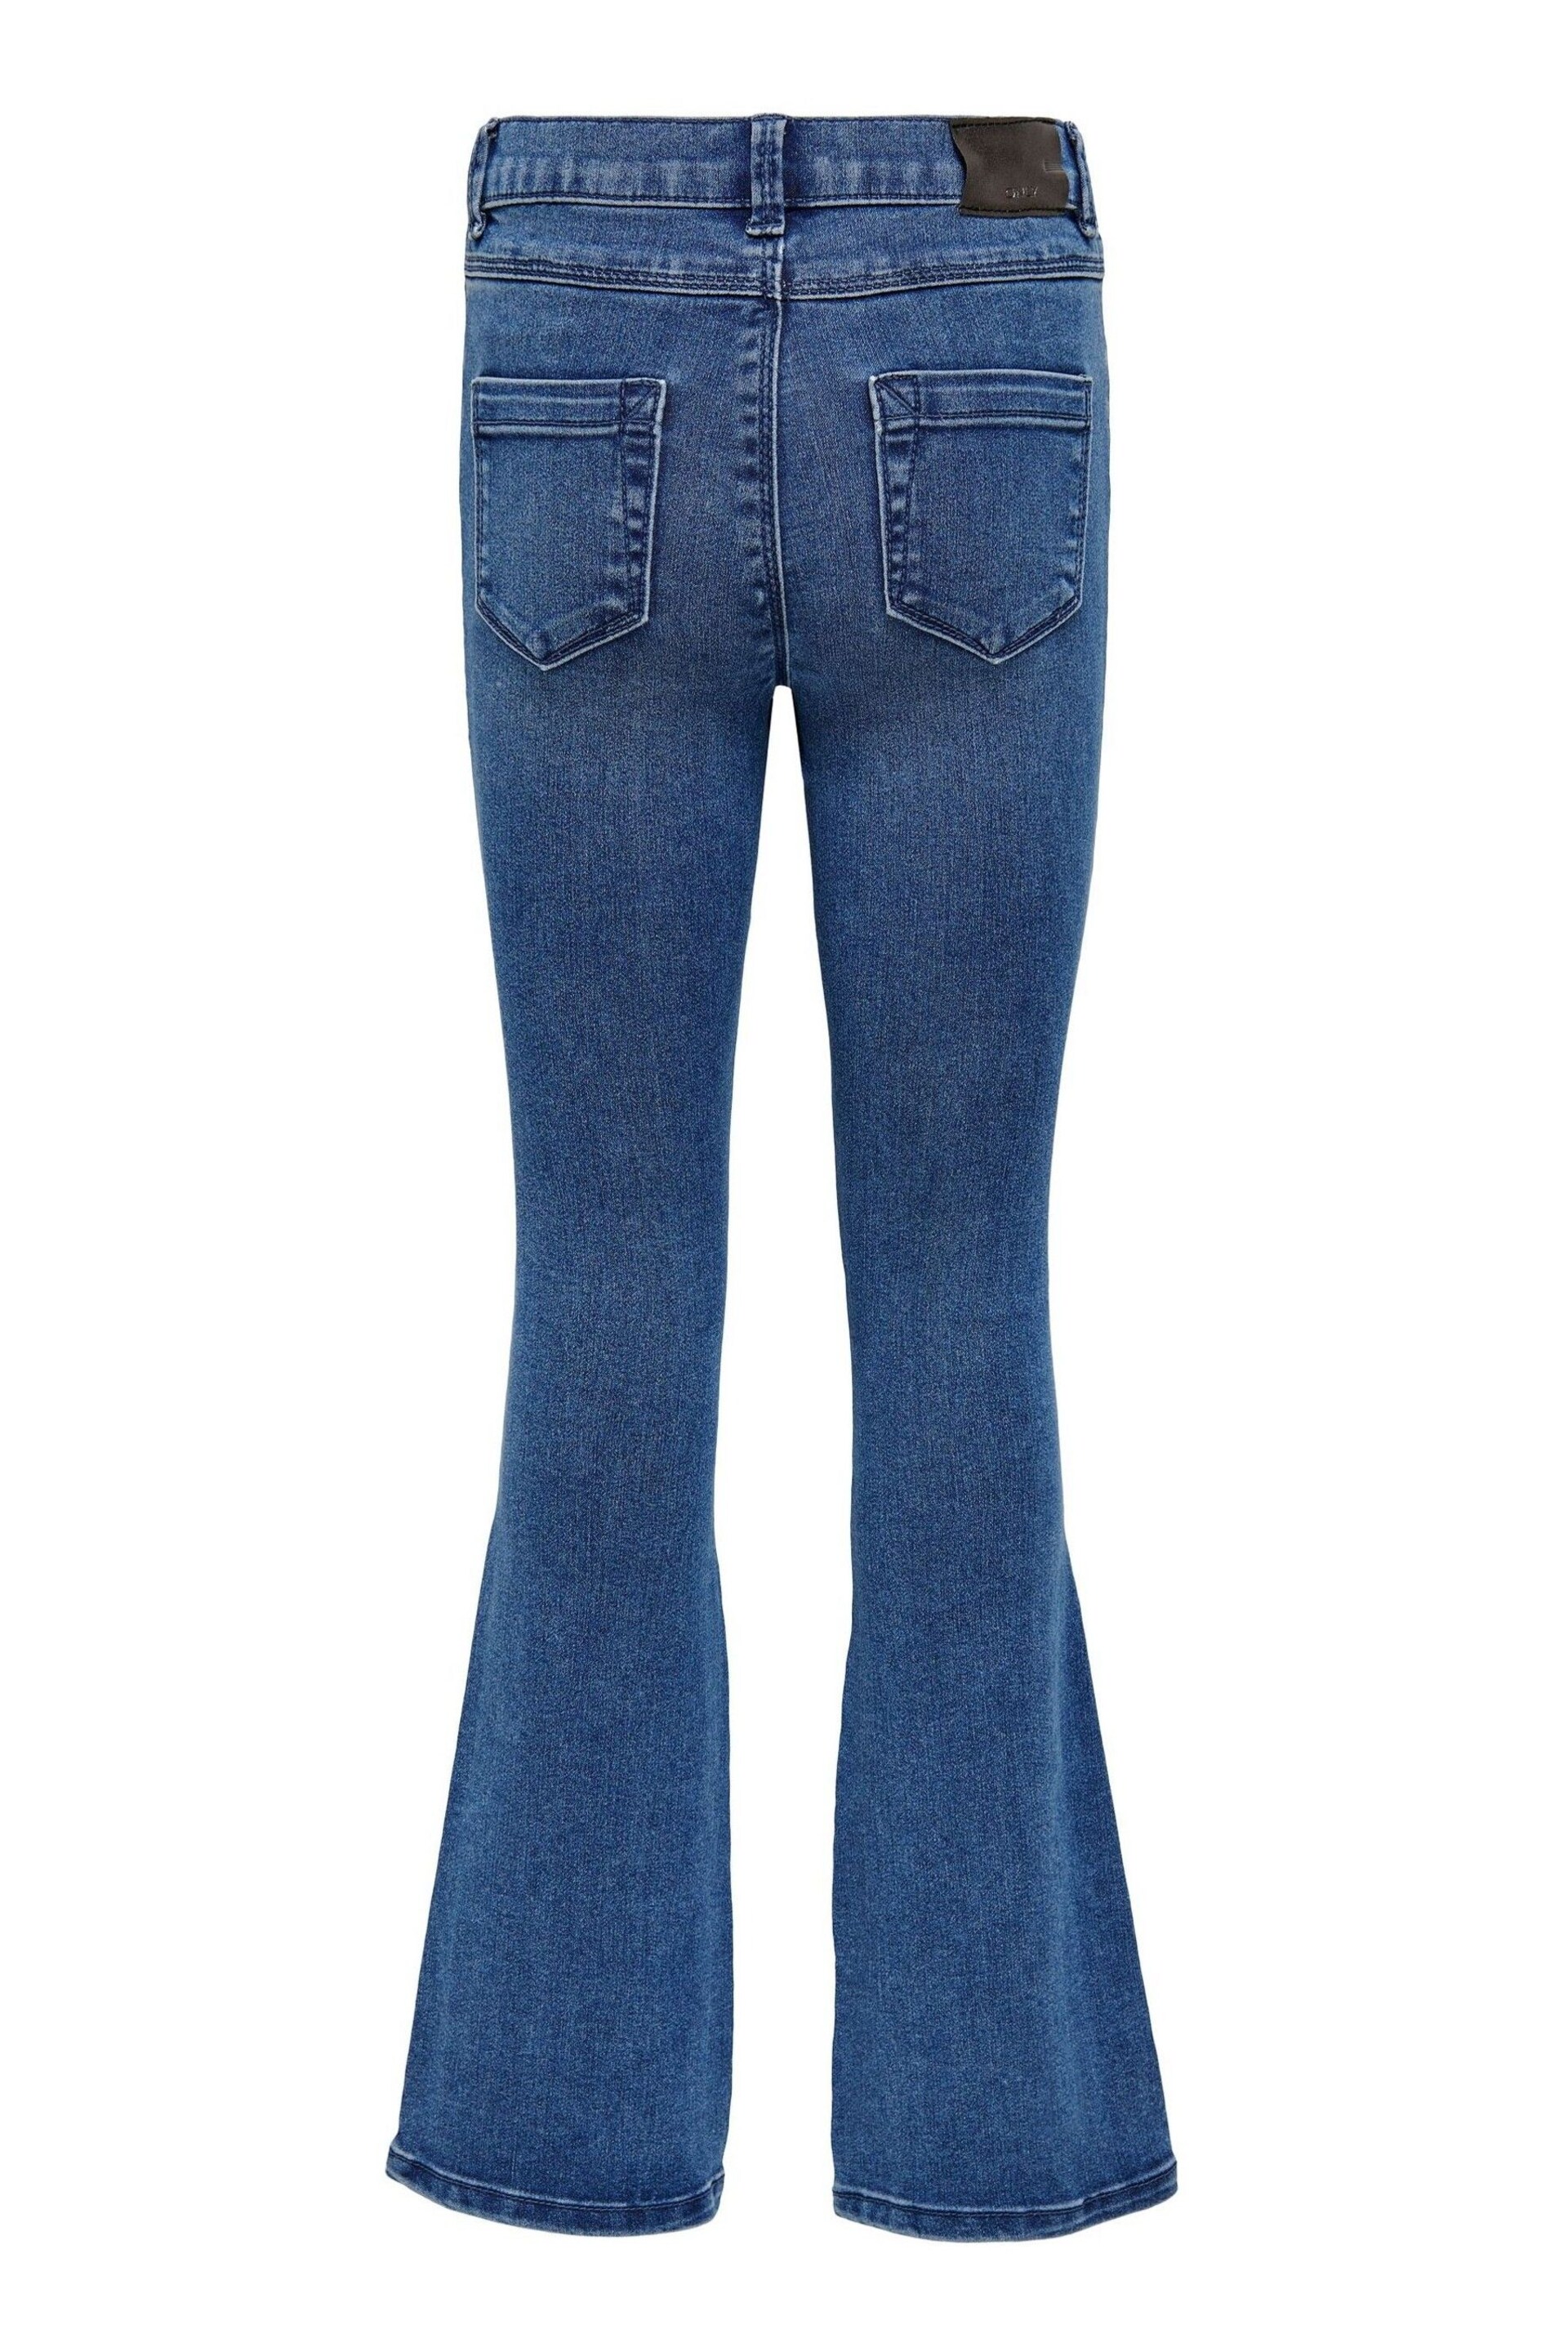 ONLY KIDS Flare Leg Jeans With Adjustable Waist - Image 4 of 5